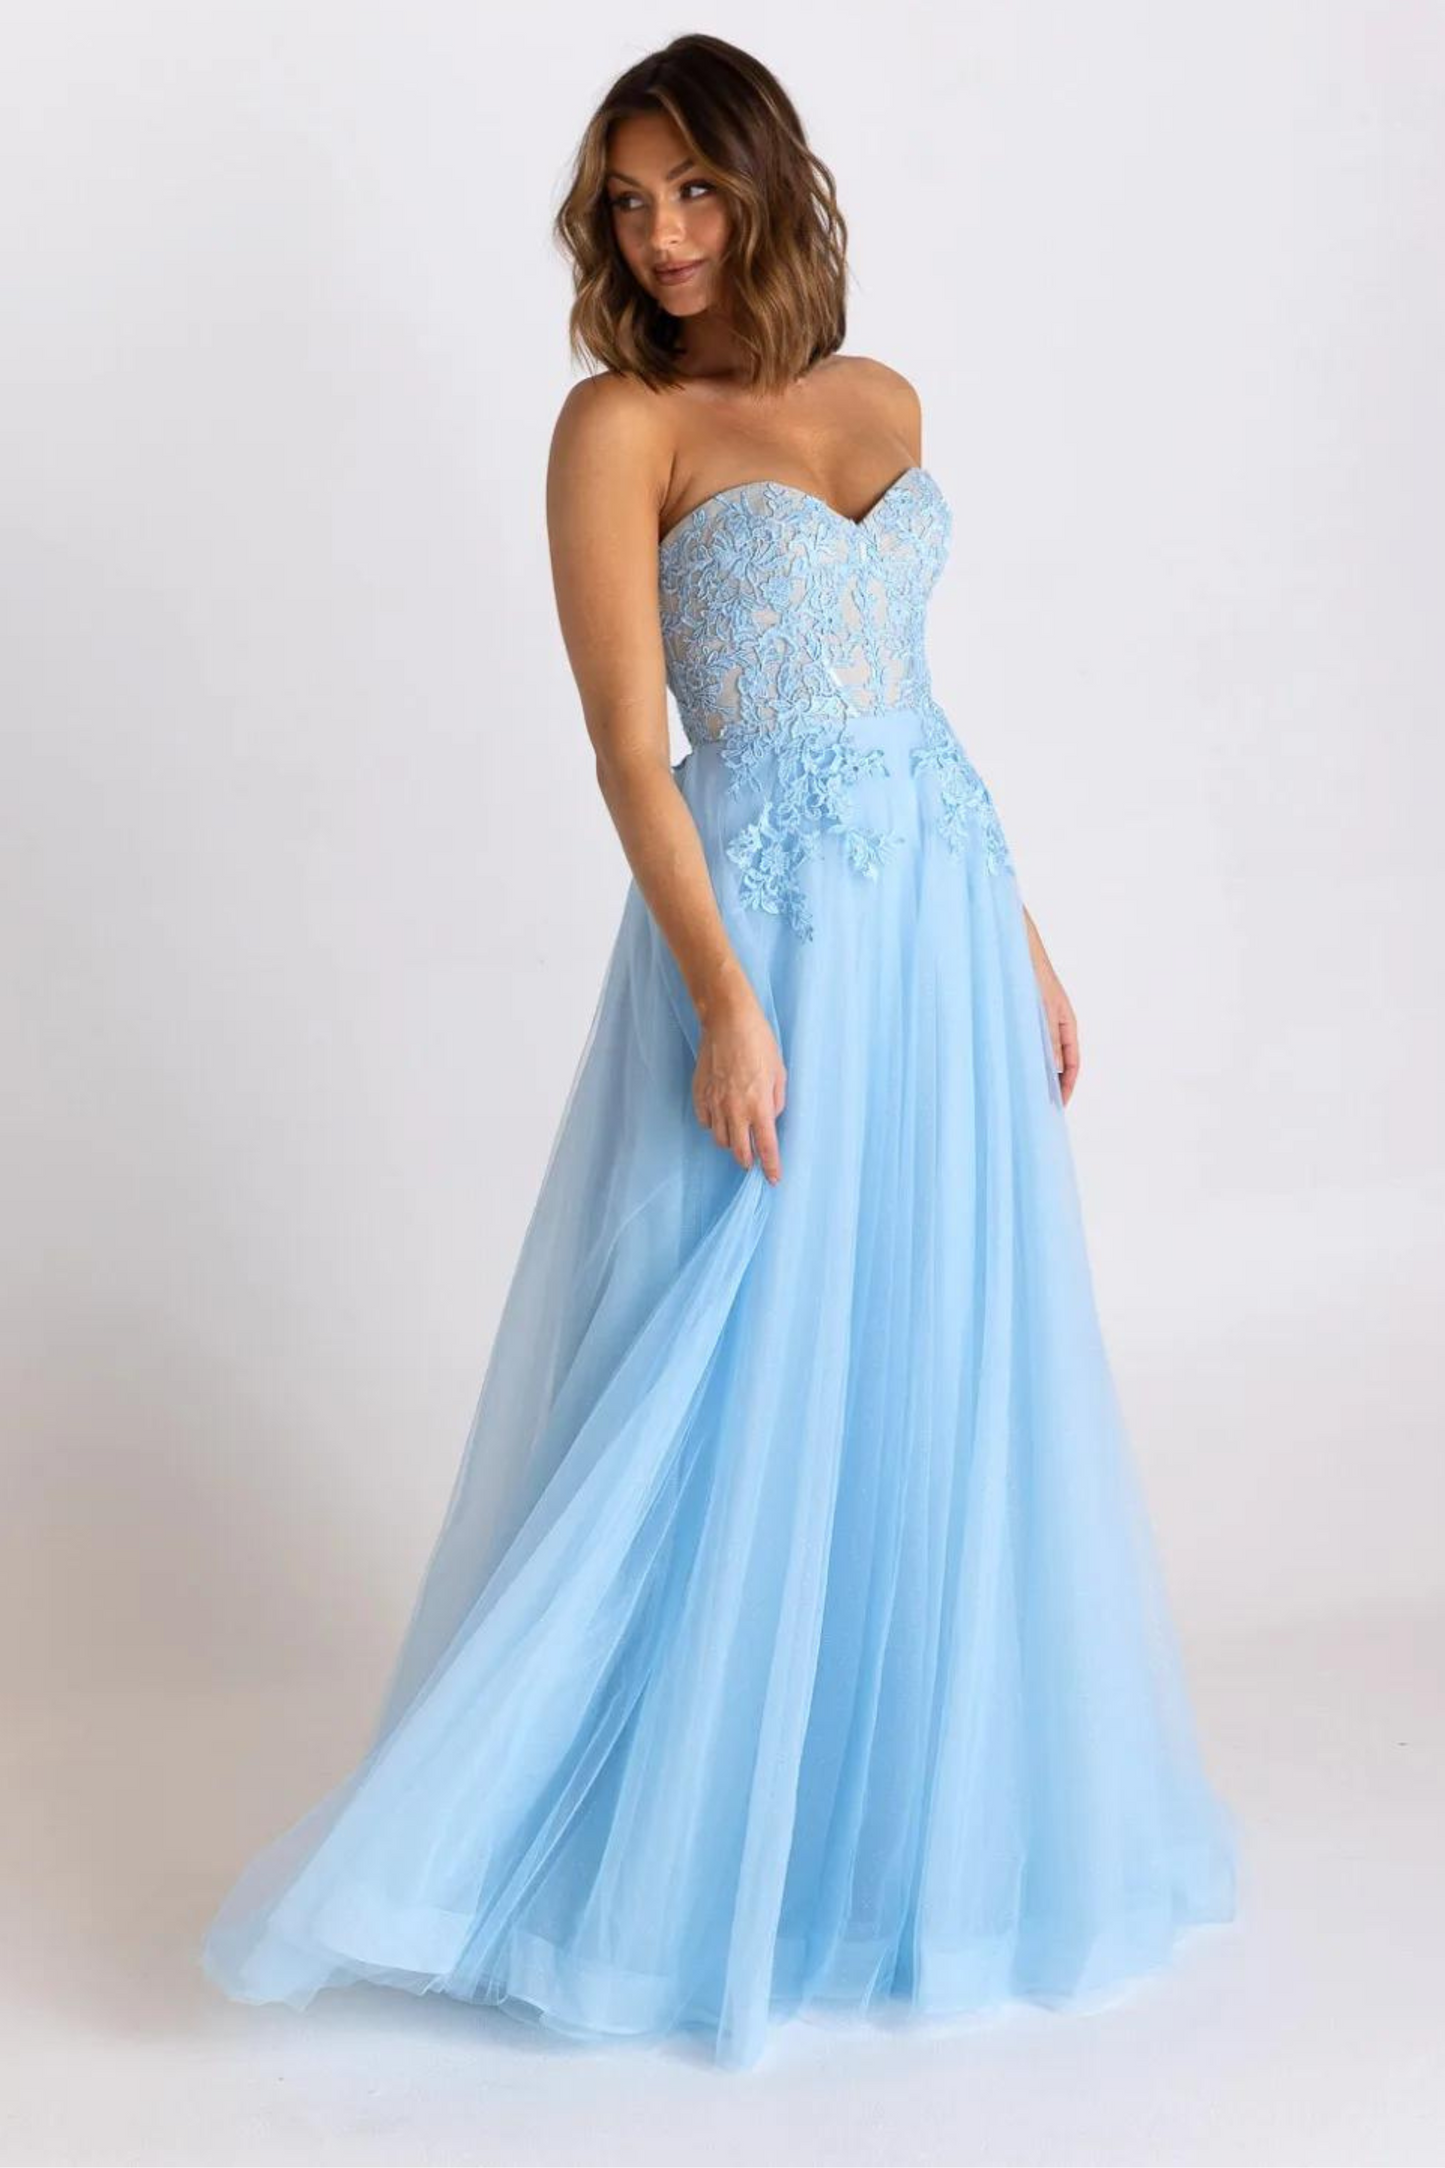 Tania Olsen a-line formal dress with embroidered lace bodice and tulle and glitter skirt in pale blue